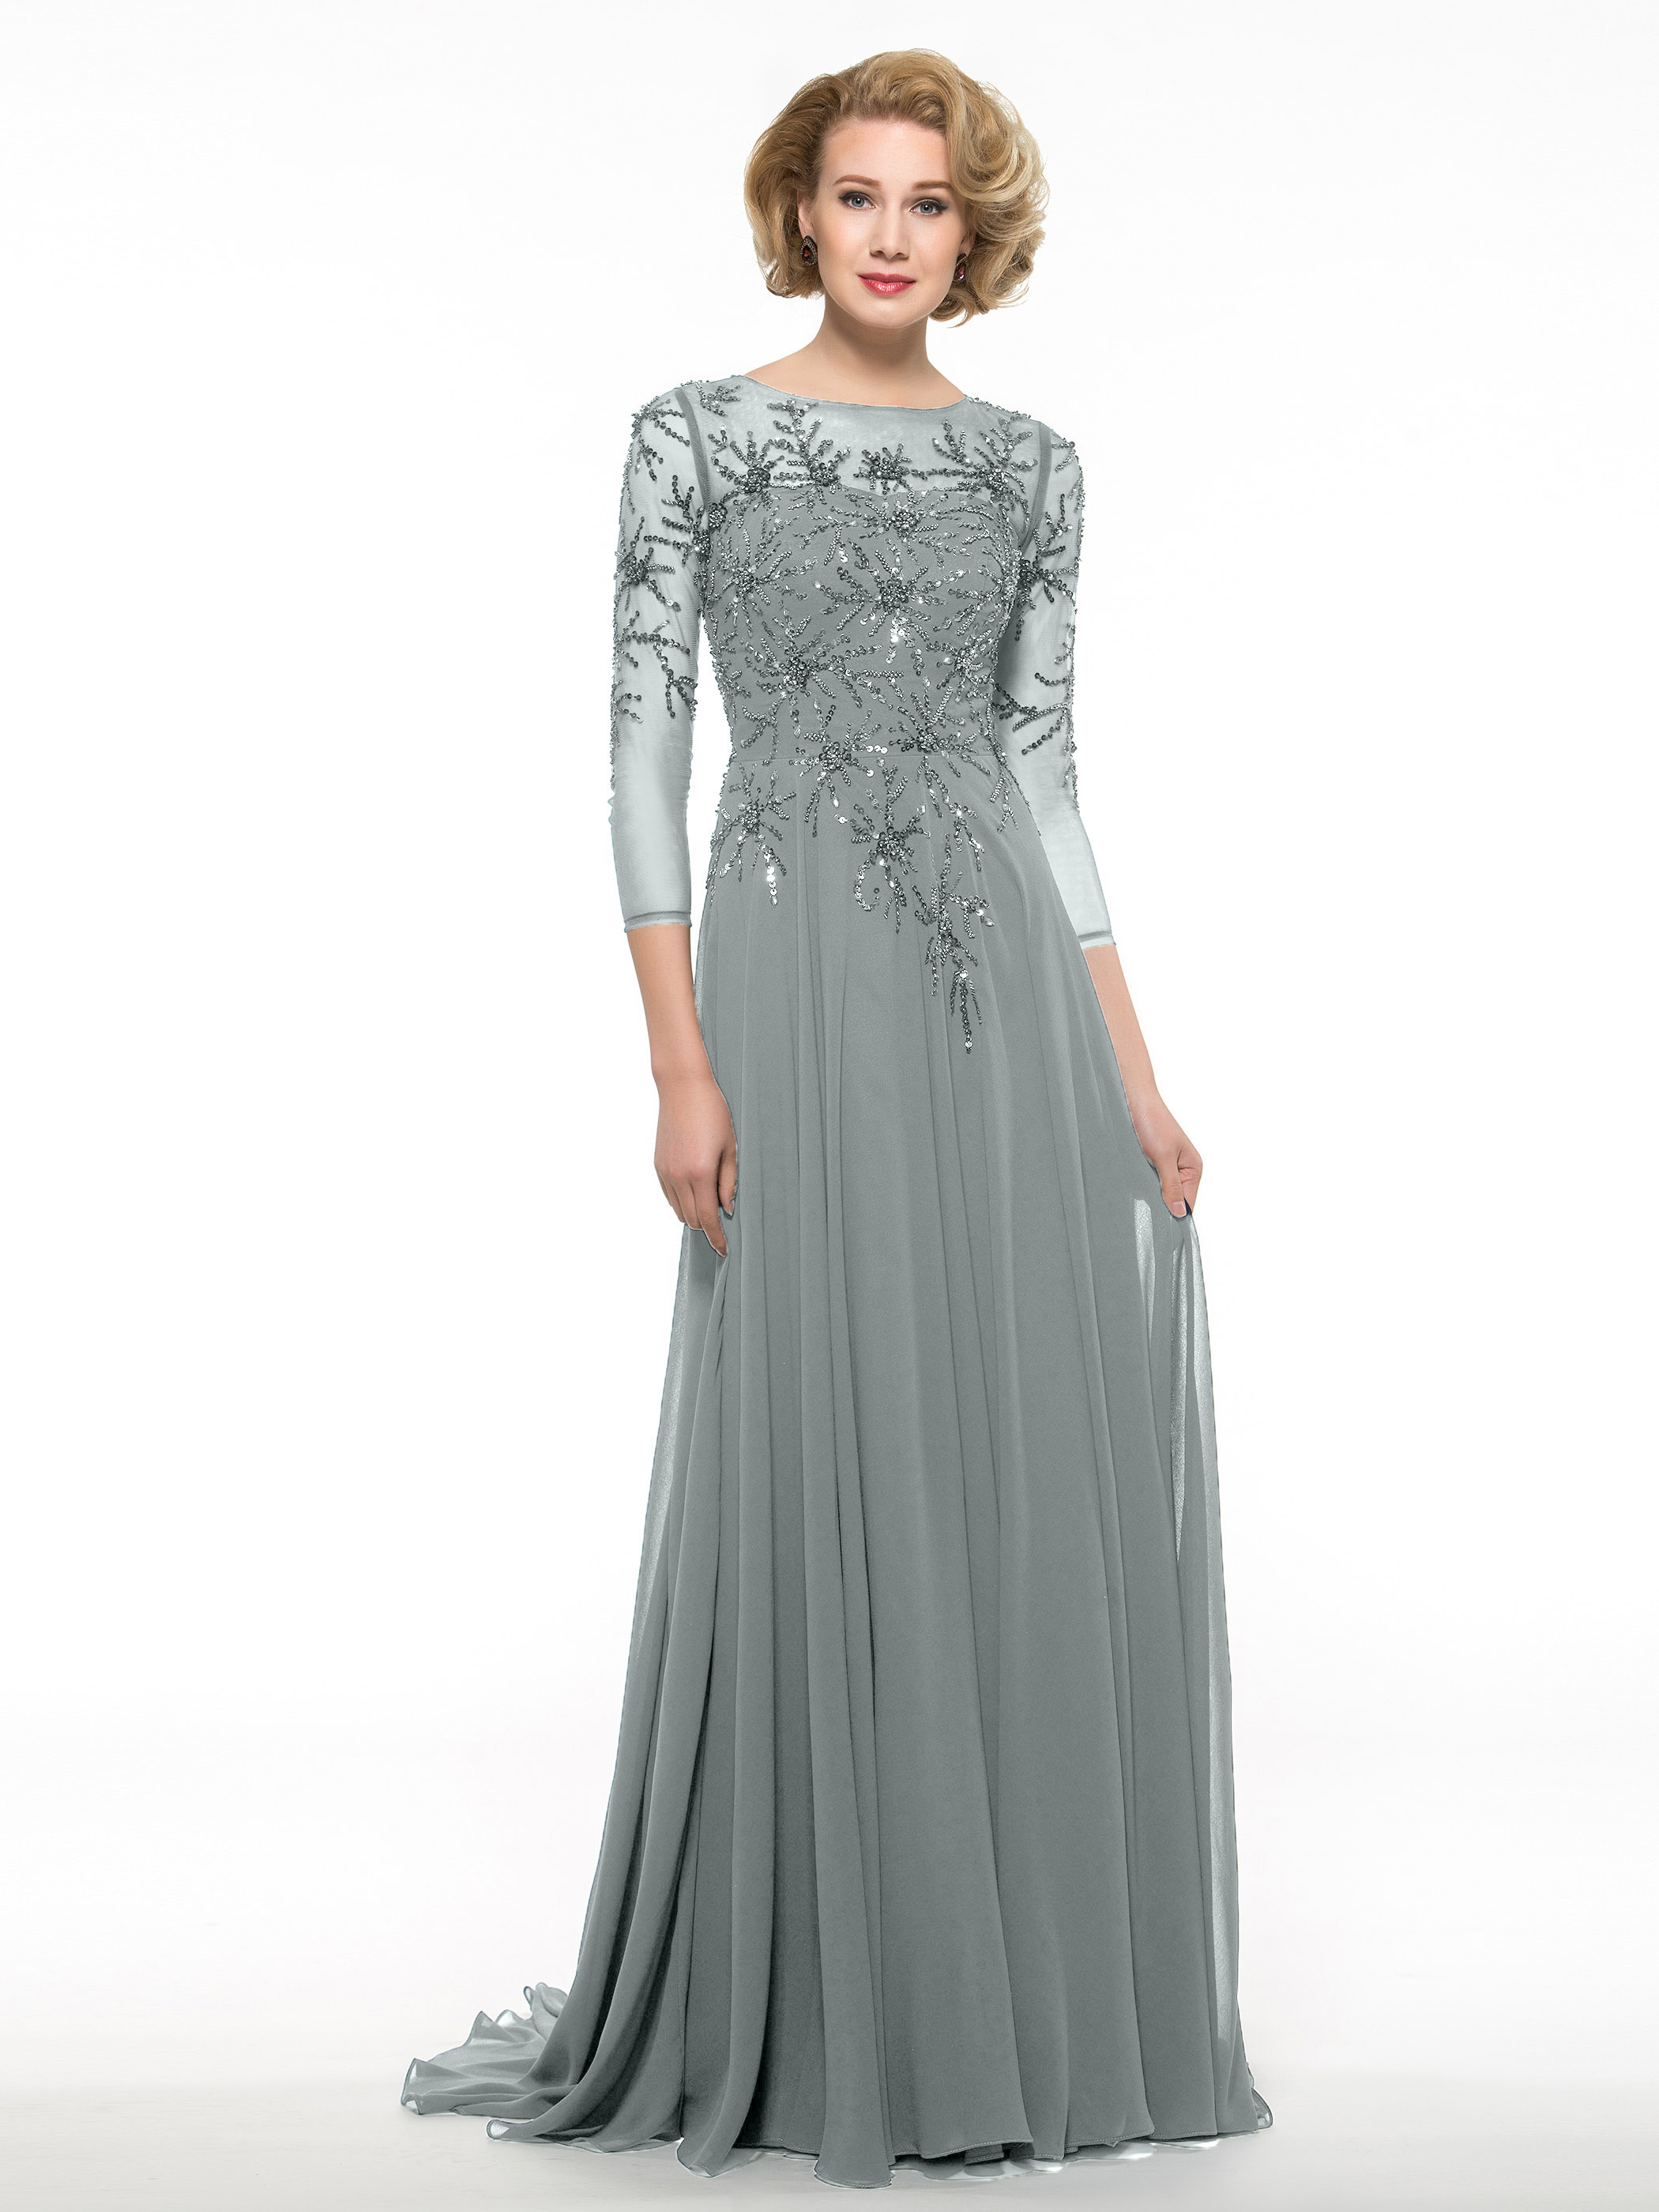 Ericdress Beading 3/4 Length Sleeves Mother Of The Bride Dress